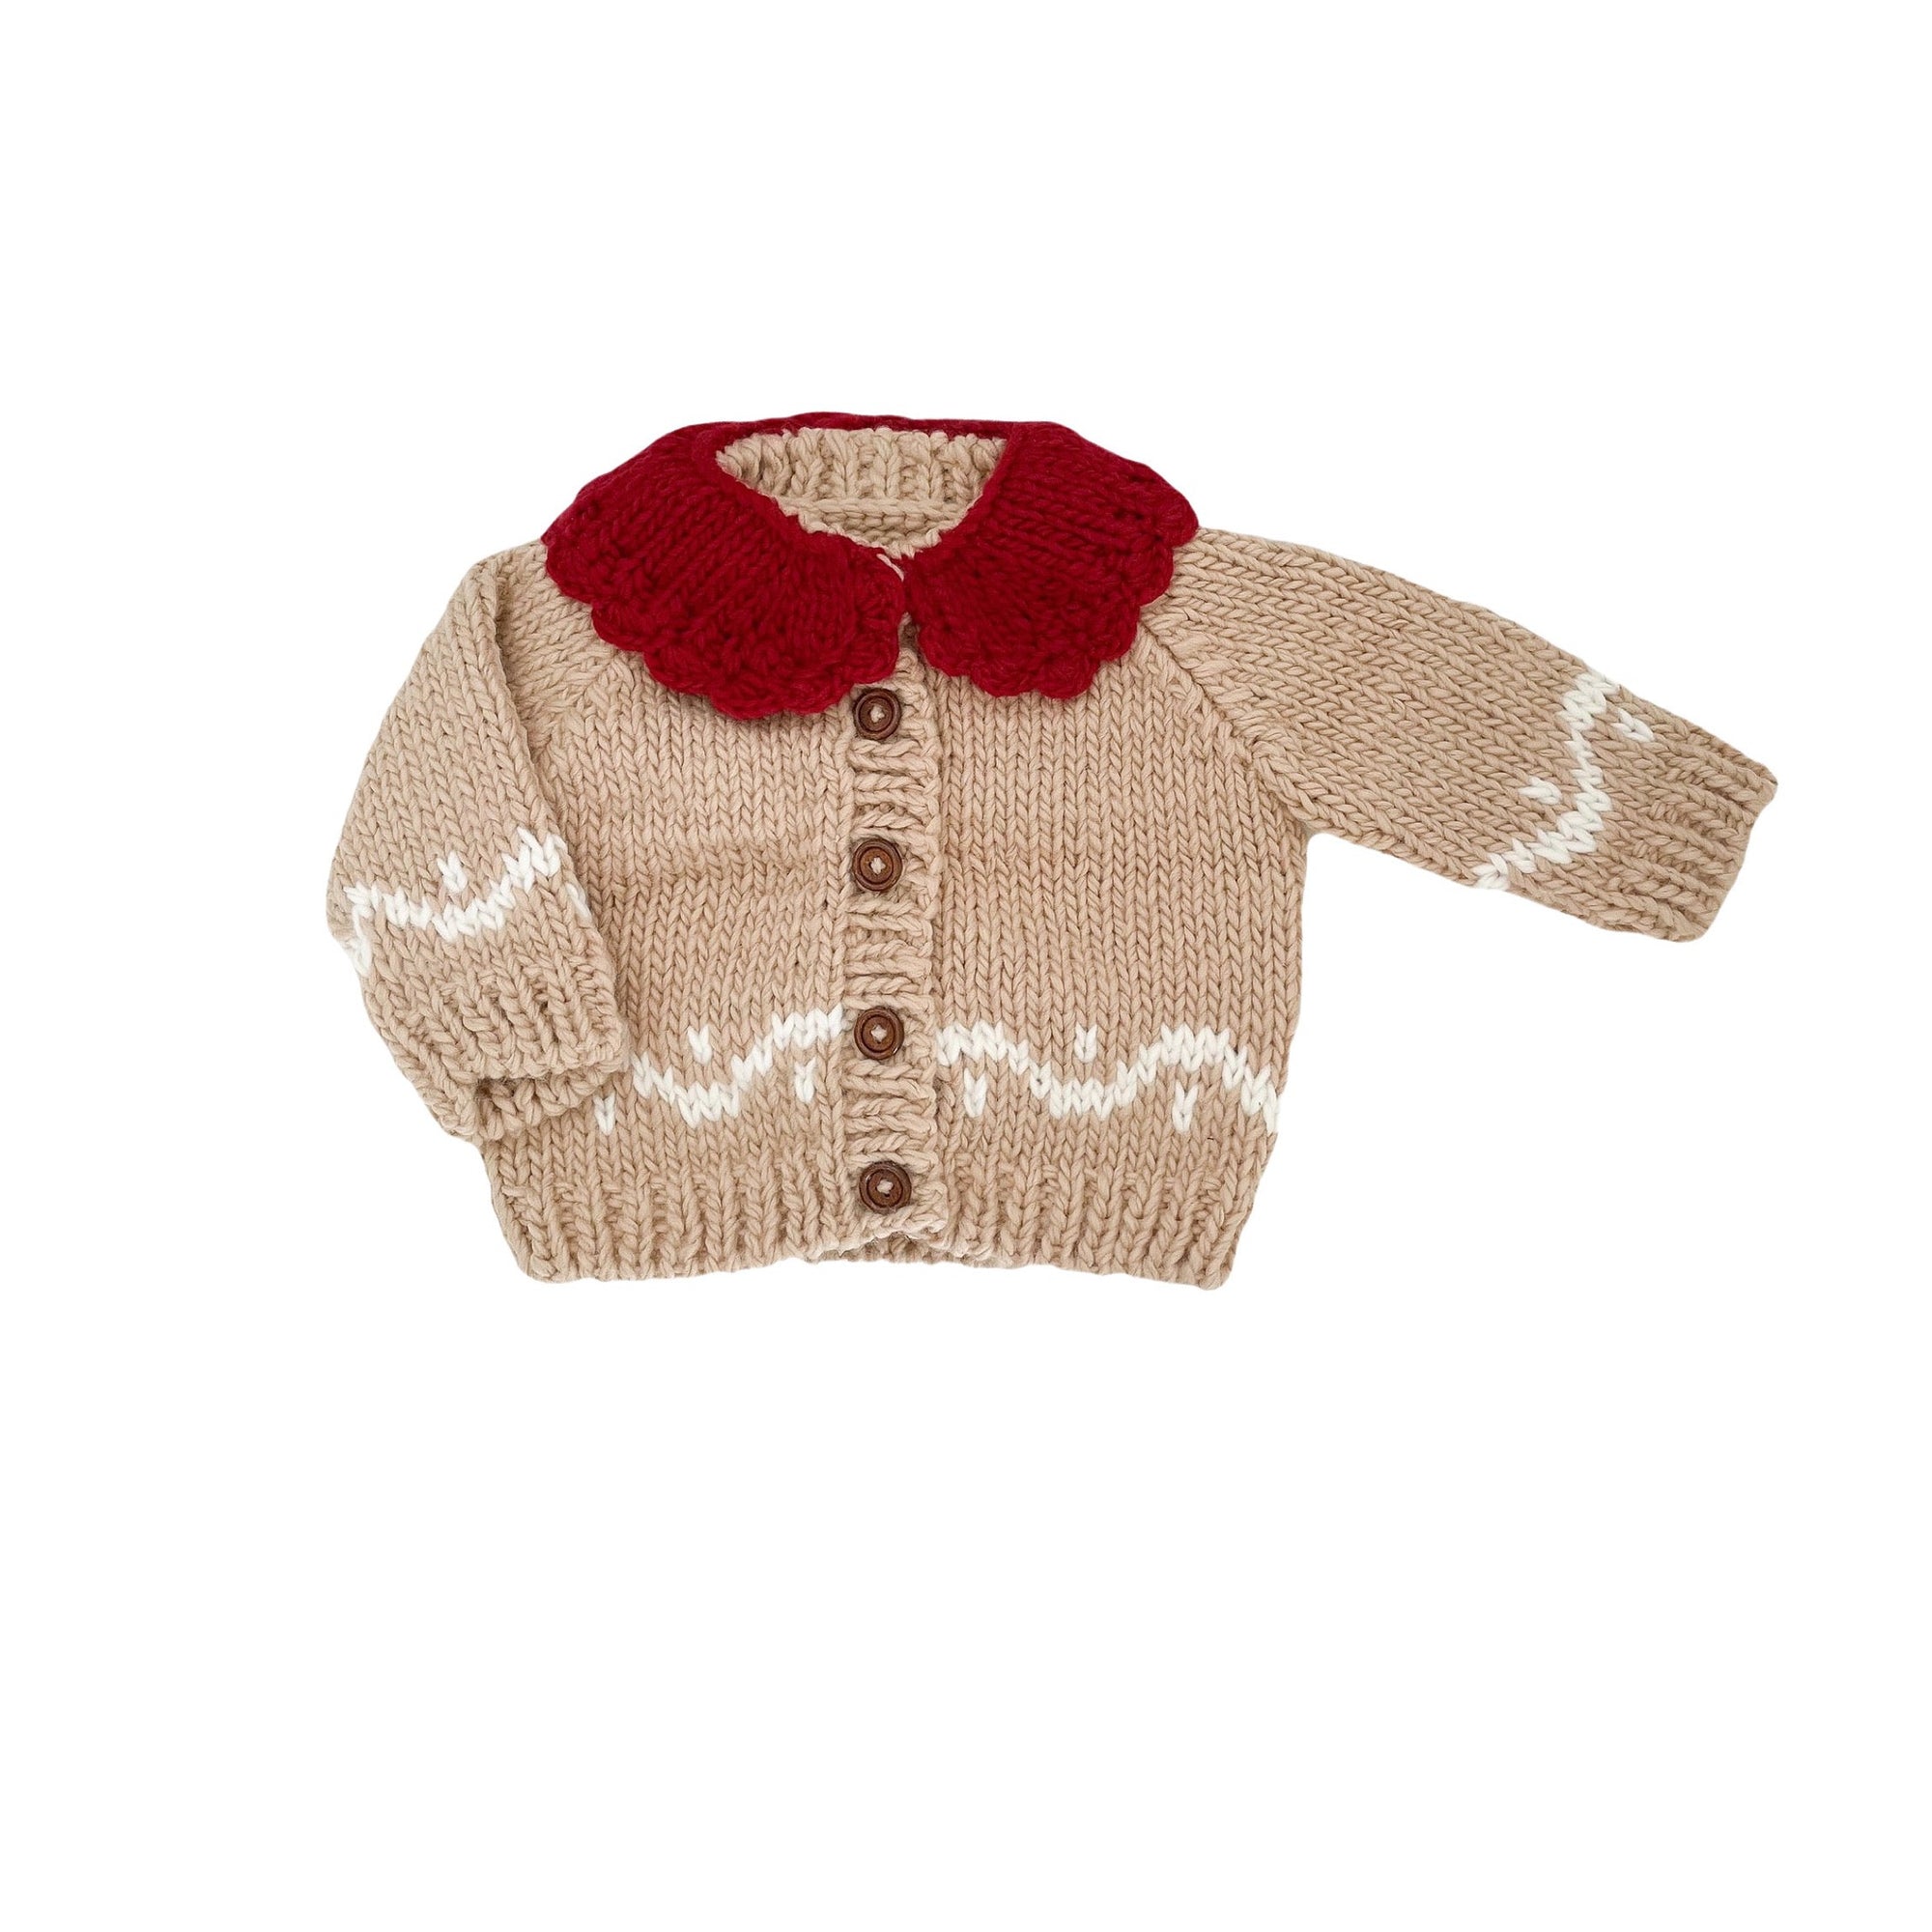 Gingerbread Hand Knit Cardigan Sweater